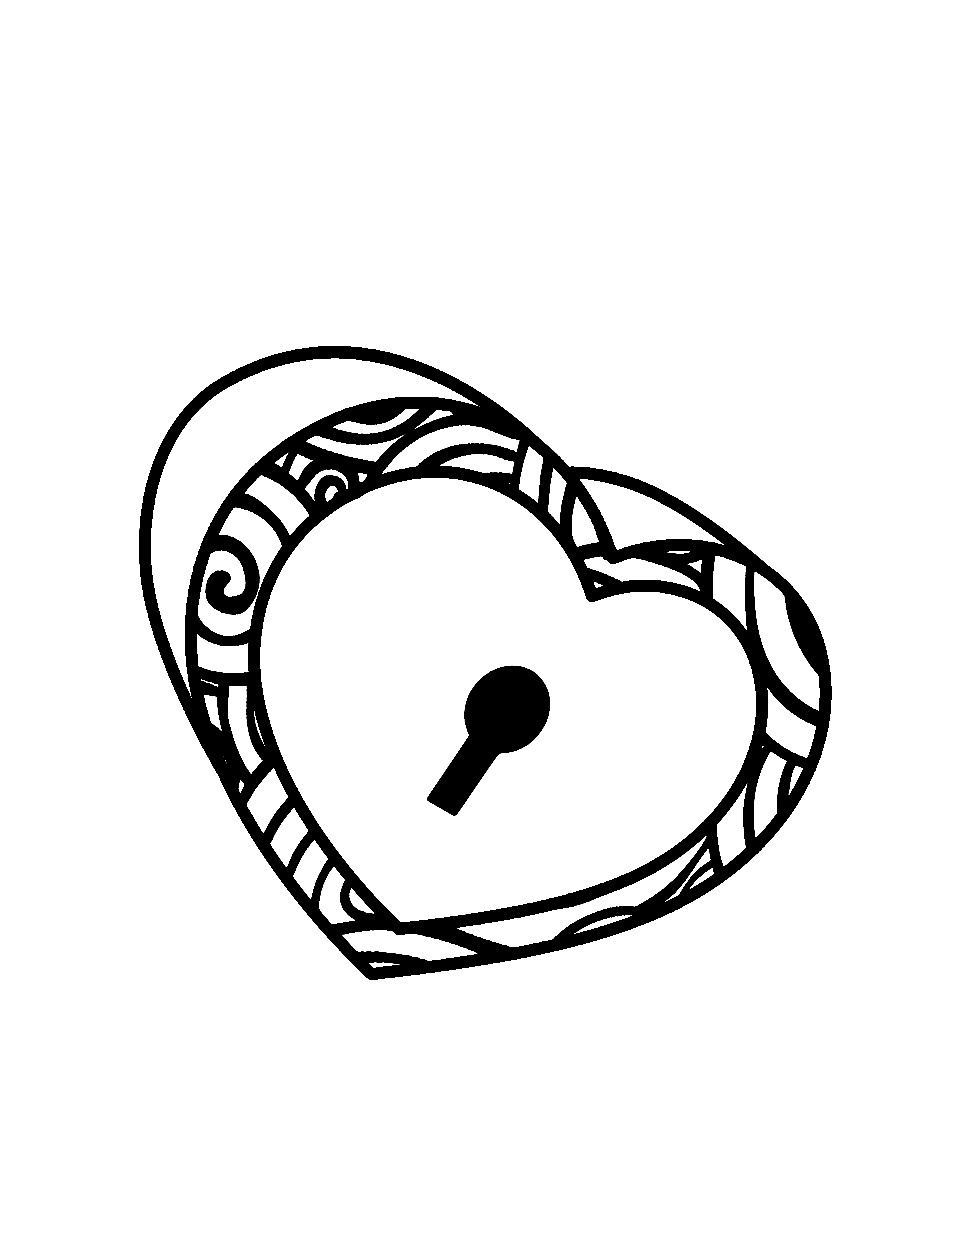 Heart Lock Coloring Page - An ornate lock in the shape of a heart.